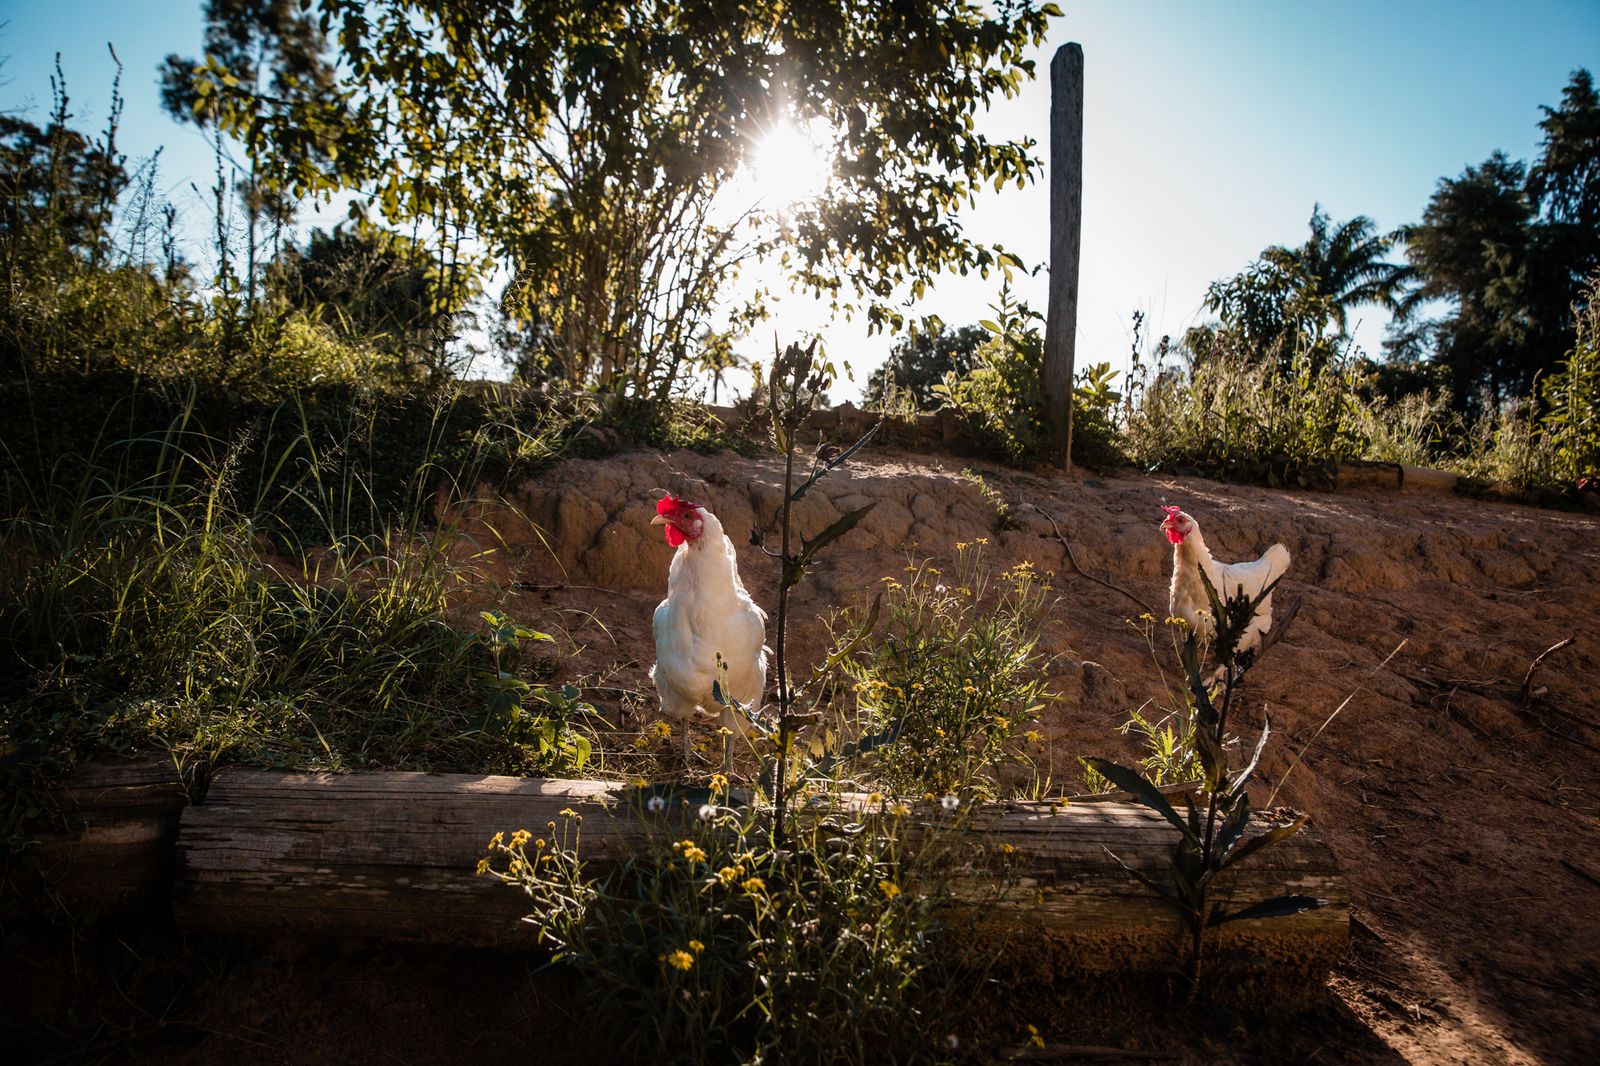 © Alinne Rezende - Image from the Life of a chicken farm during the Covid-19 pandemic in Brazil photography project